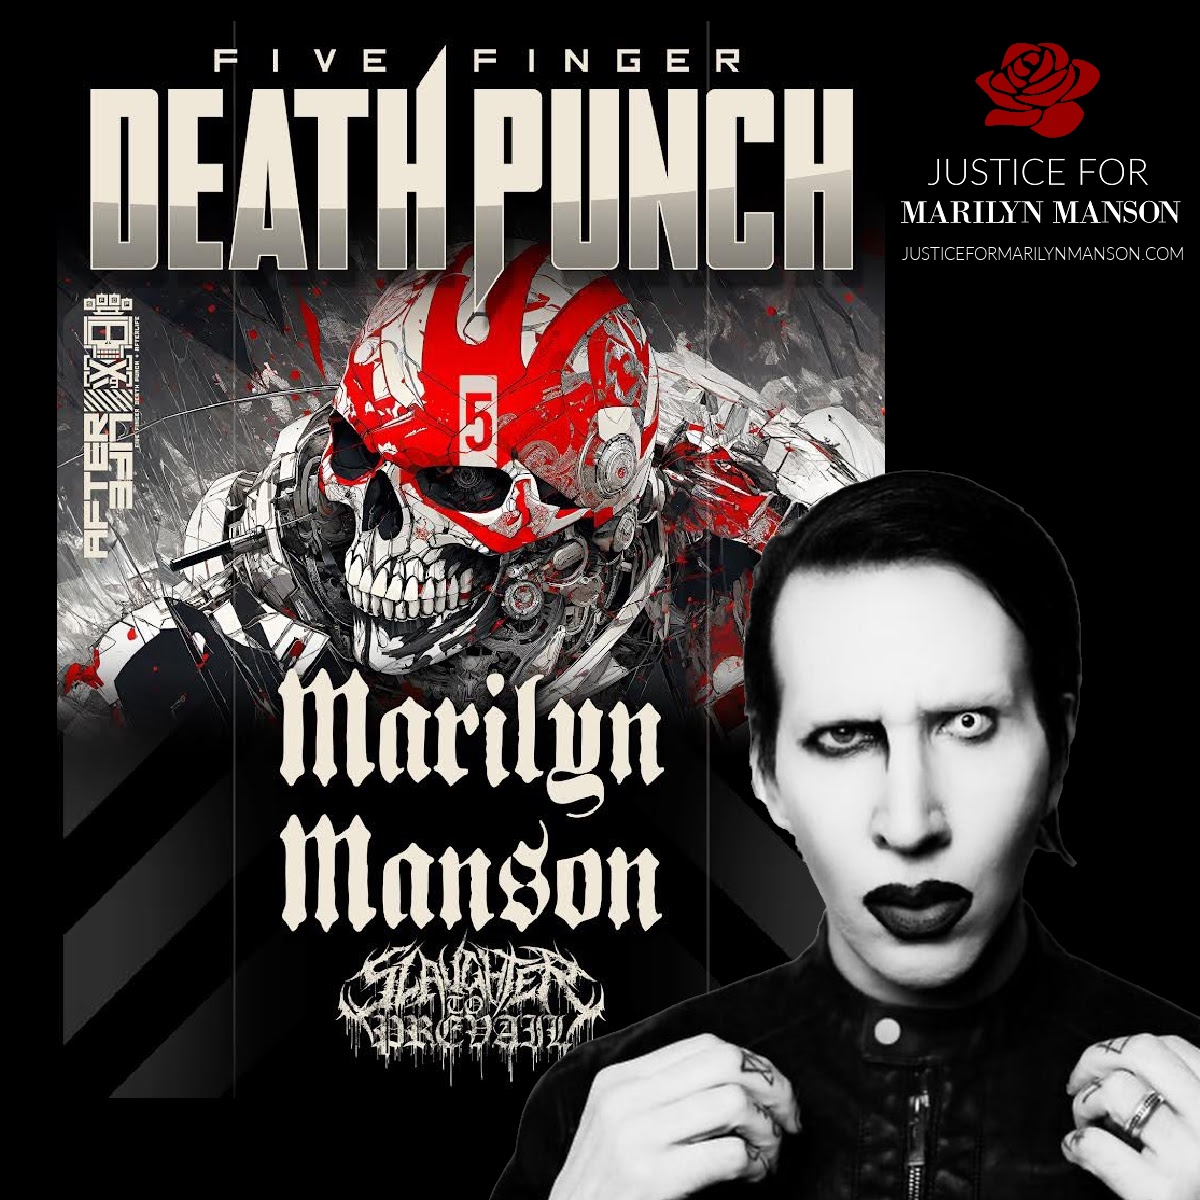 Marilyn Manson Tour Dates announced with Five Finger Death Punch